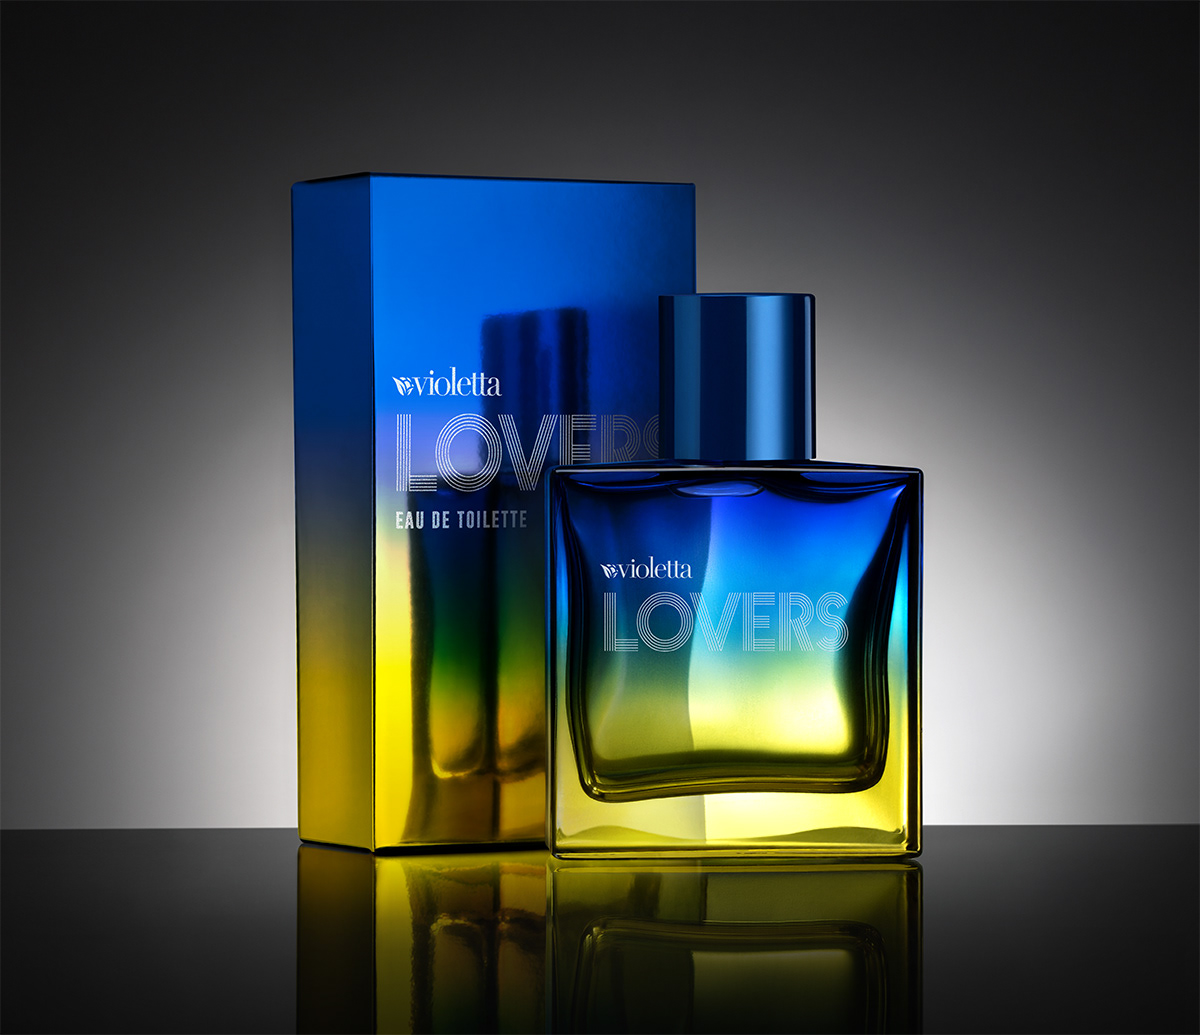 color cover drops Fragrance light Lovers Packaging parfum perfume perfumery